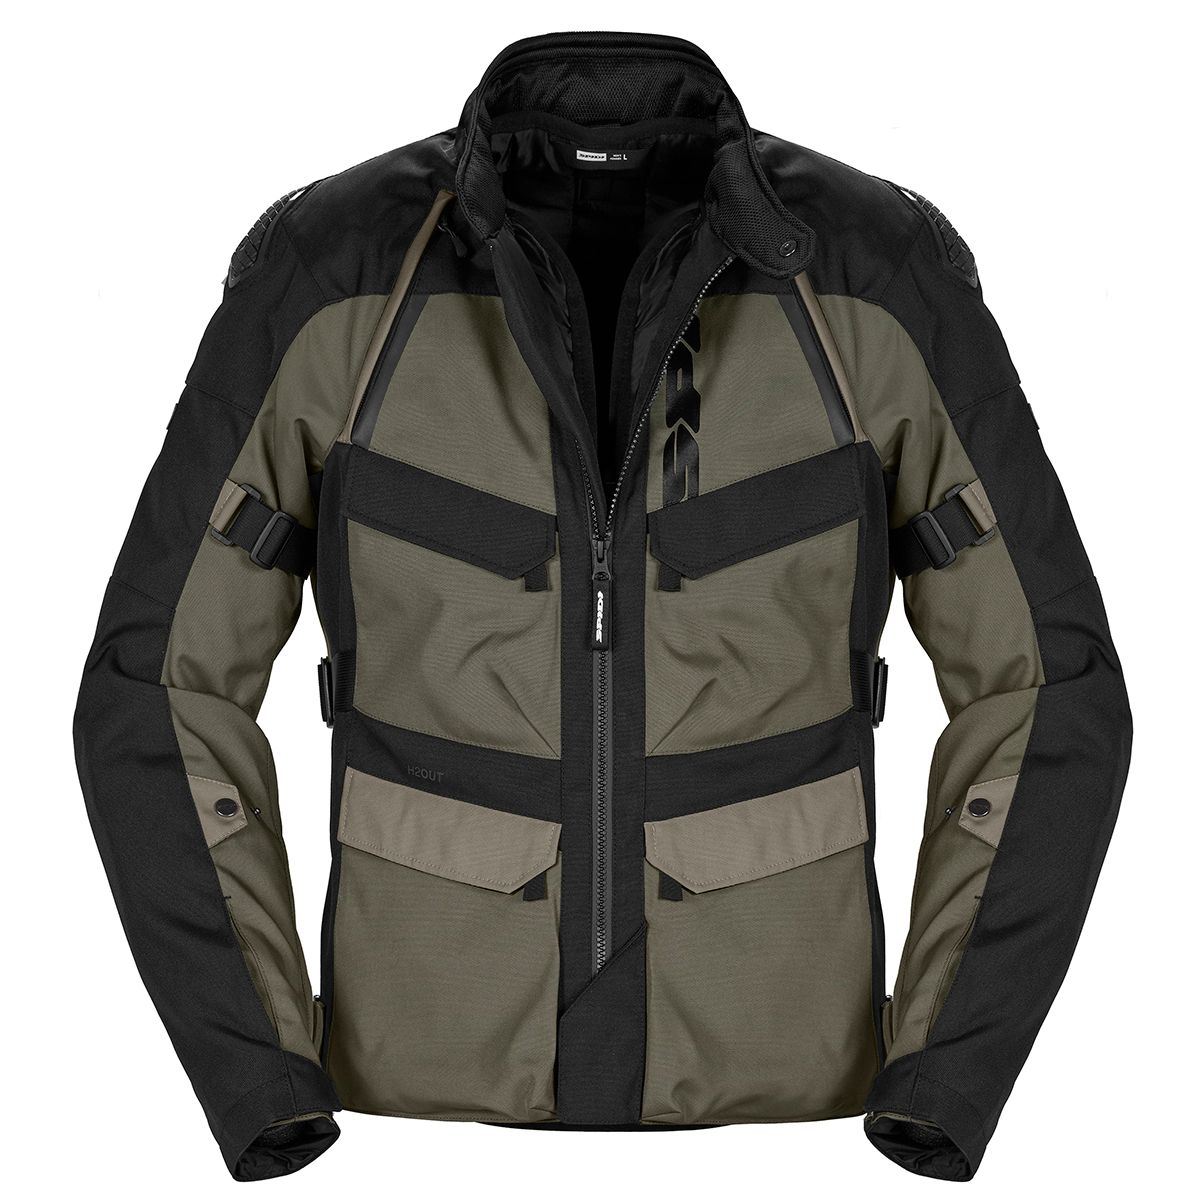 Image of Spidi Rw H2Out Jacket Militar Size 3XL ID 8030161475920